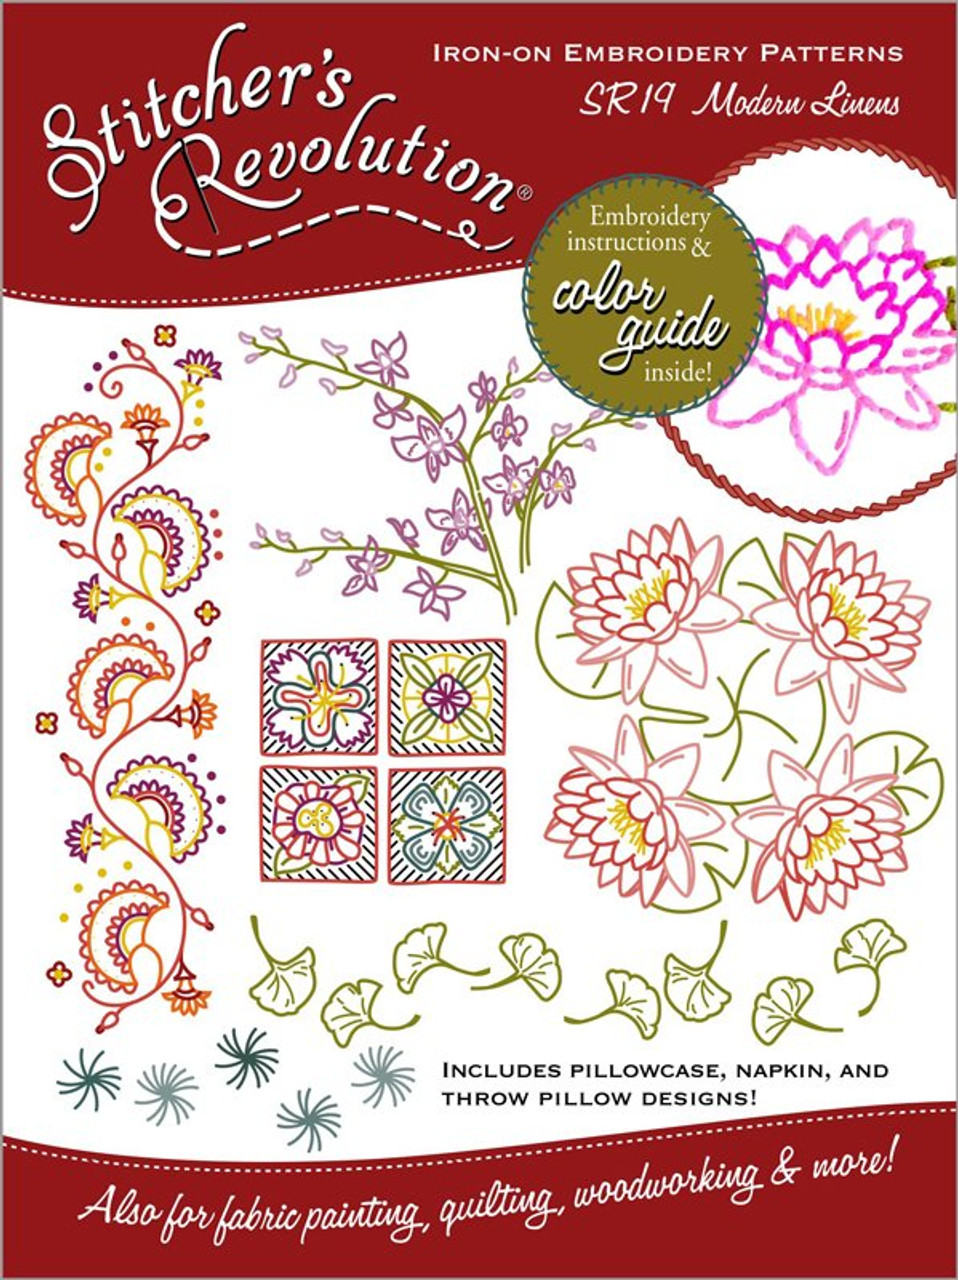 Stitchers Revolution Clearance, FANCIFUL BIRDS SR26 Embroidery Pattern, Iron  on Embroidery Patterns With Floss Recommendations, Ships Fast 